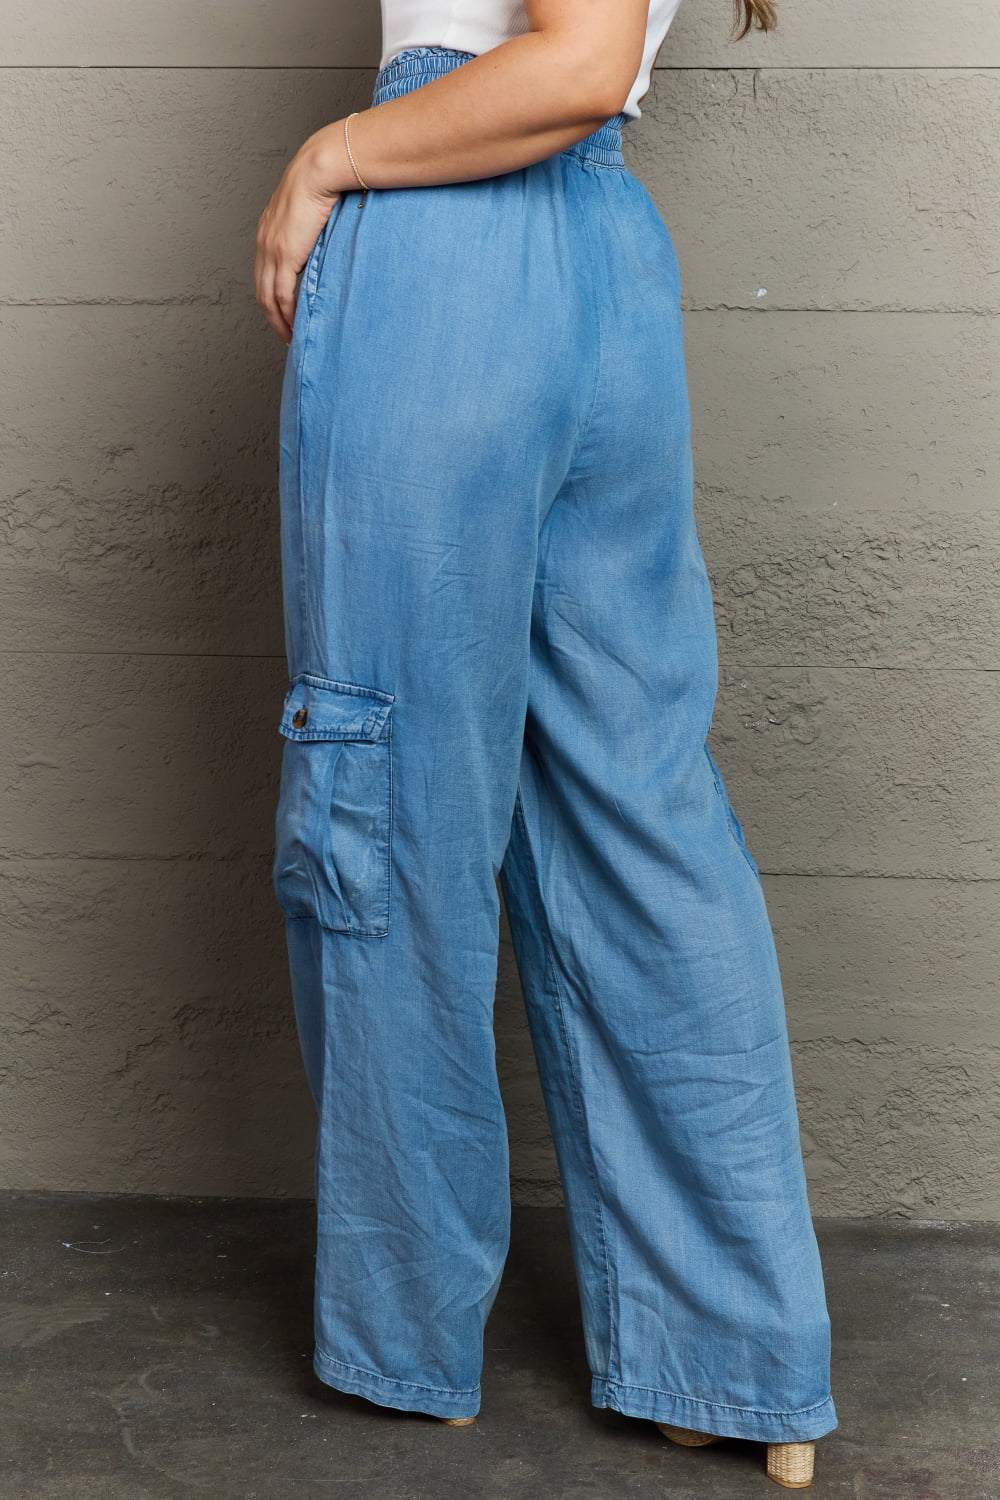 Stylish girl wears denim cargo pants: versatile, comfy, chic. 100% lyocell. Pockets. Care: Cold machine wash, low tumble dry